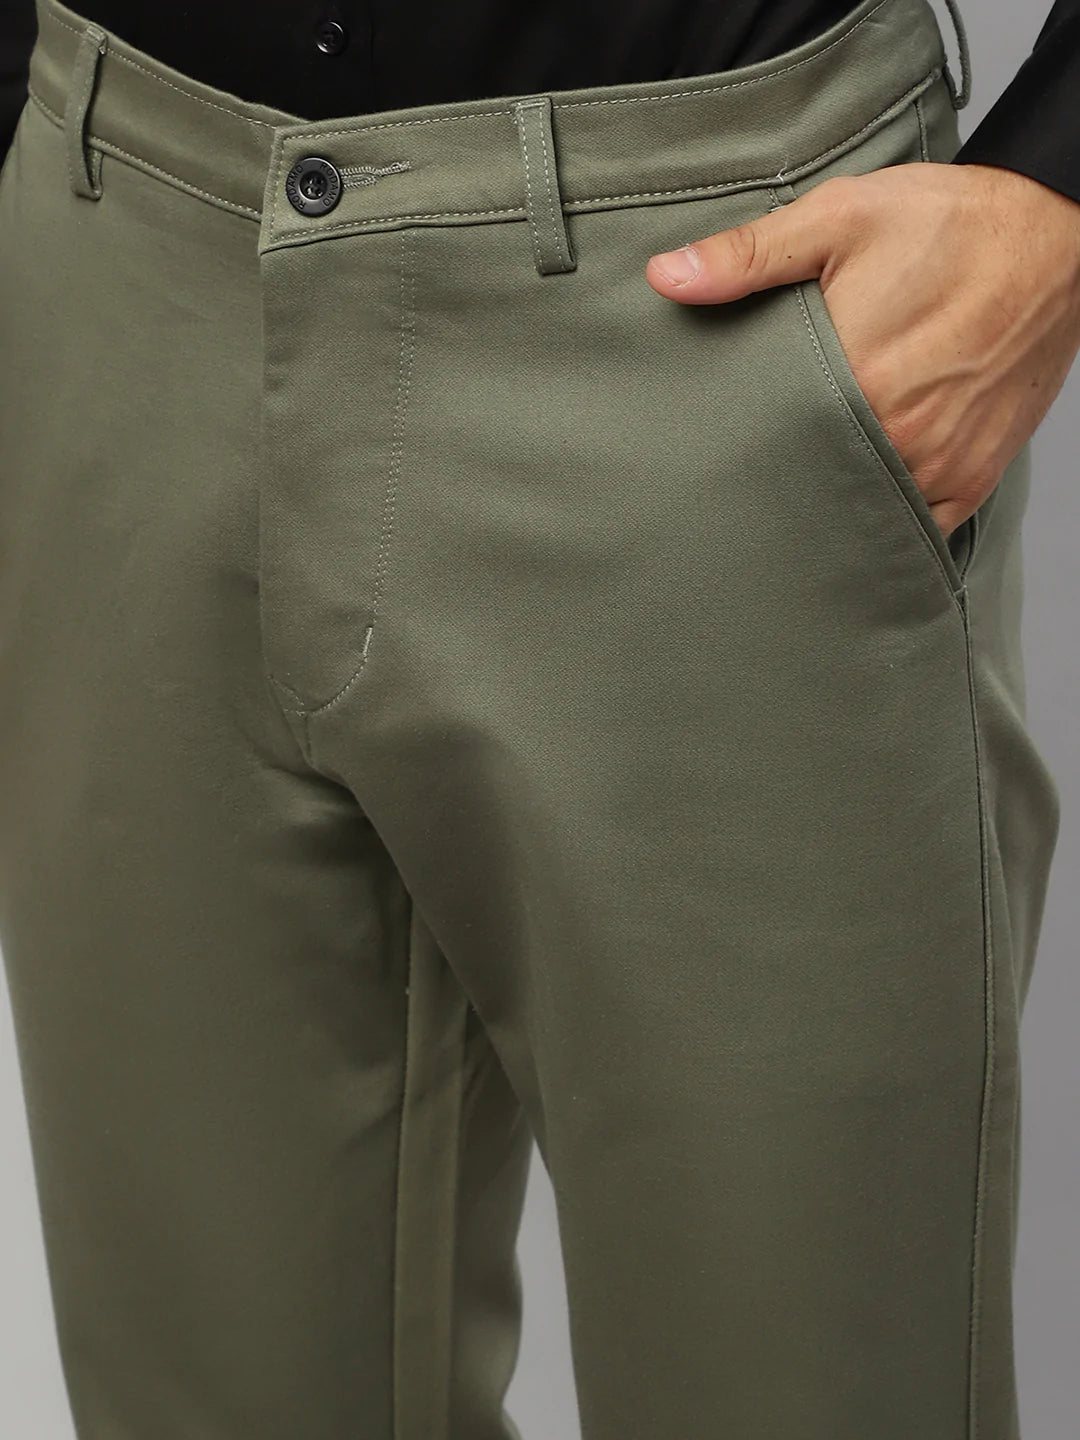 PROTOCOL Slim Fit Men Light Green Trousers - Buy PROTOCOL Slim Fit Men  Light Green Trousers Online at Best Prices in India | Flipkart.com